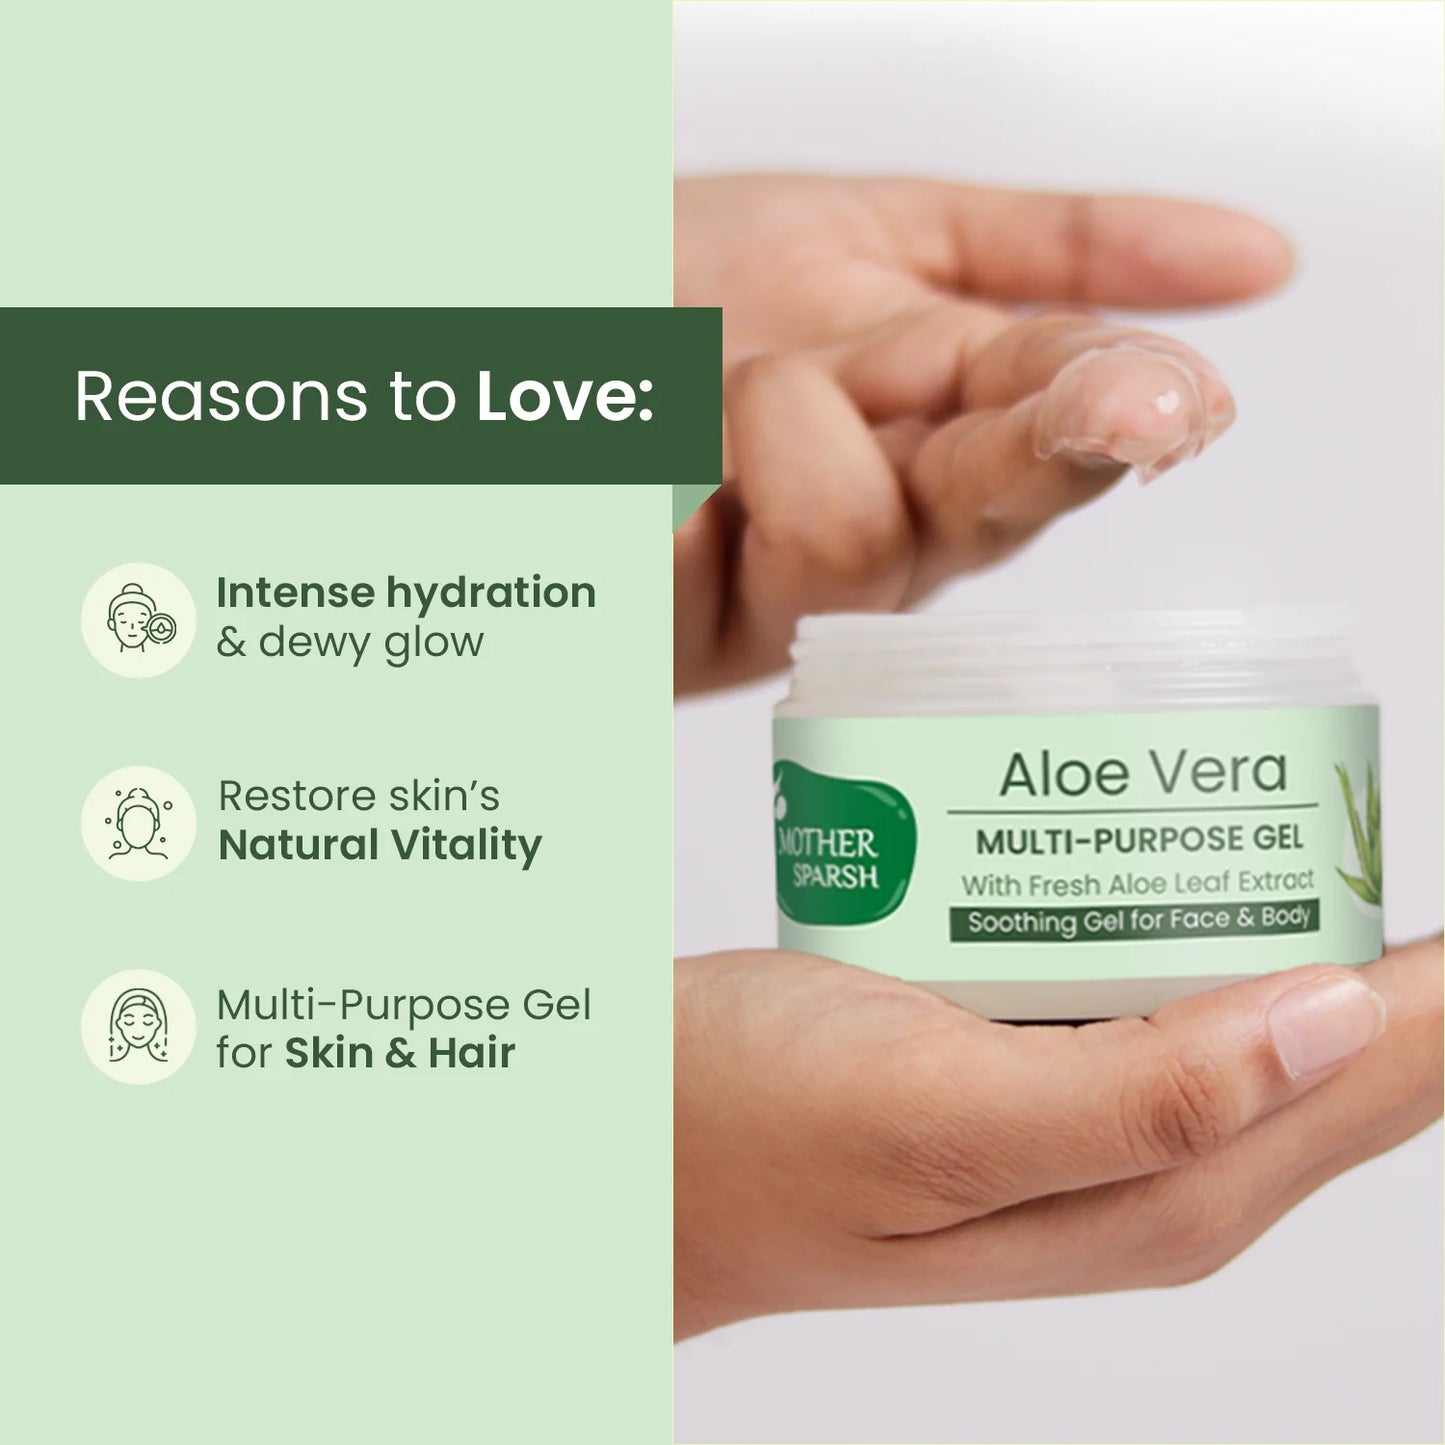 Pure Aloe Vera Gel with Organically-derived Aloe Leaf Extracts